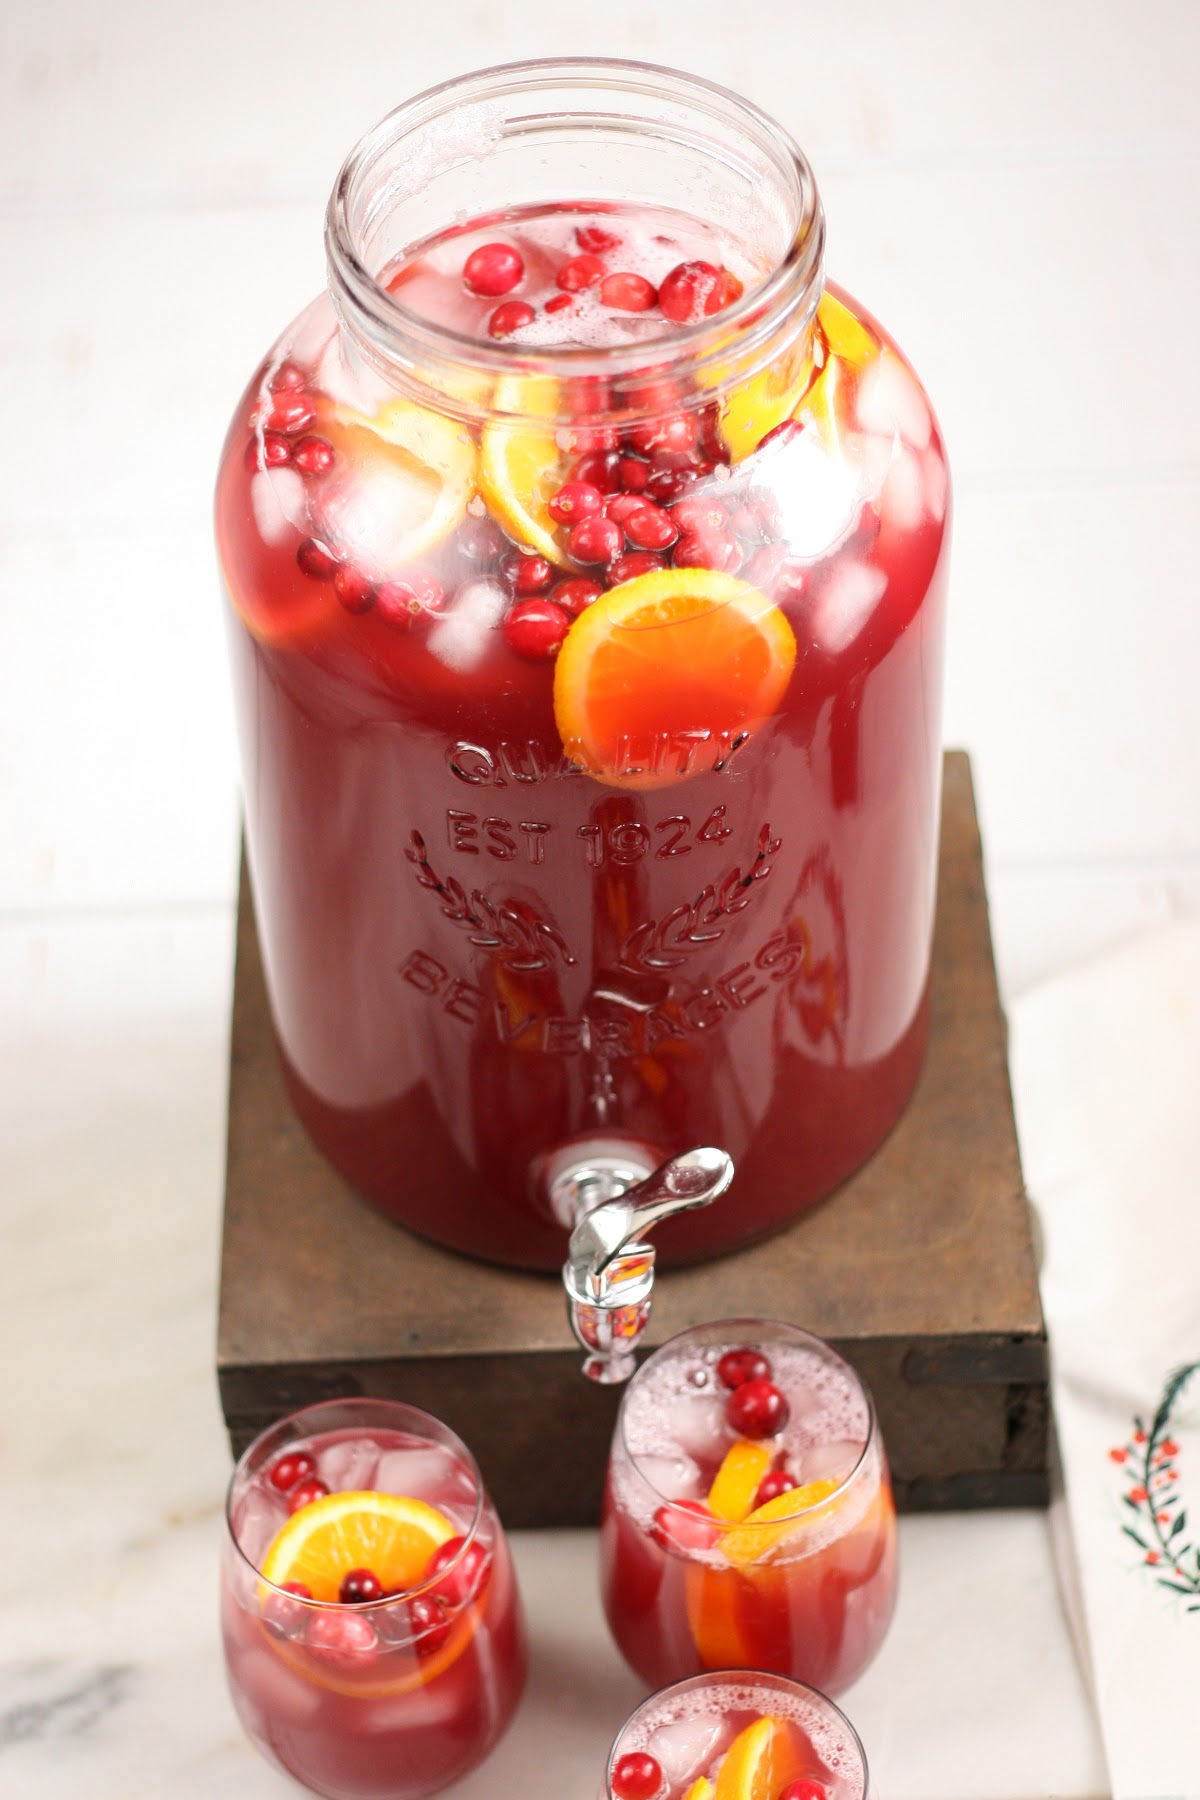 Clear drink dispenser of red punch, cranberries, orange slices, ice cubes.